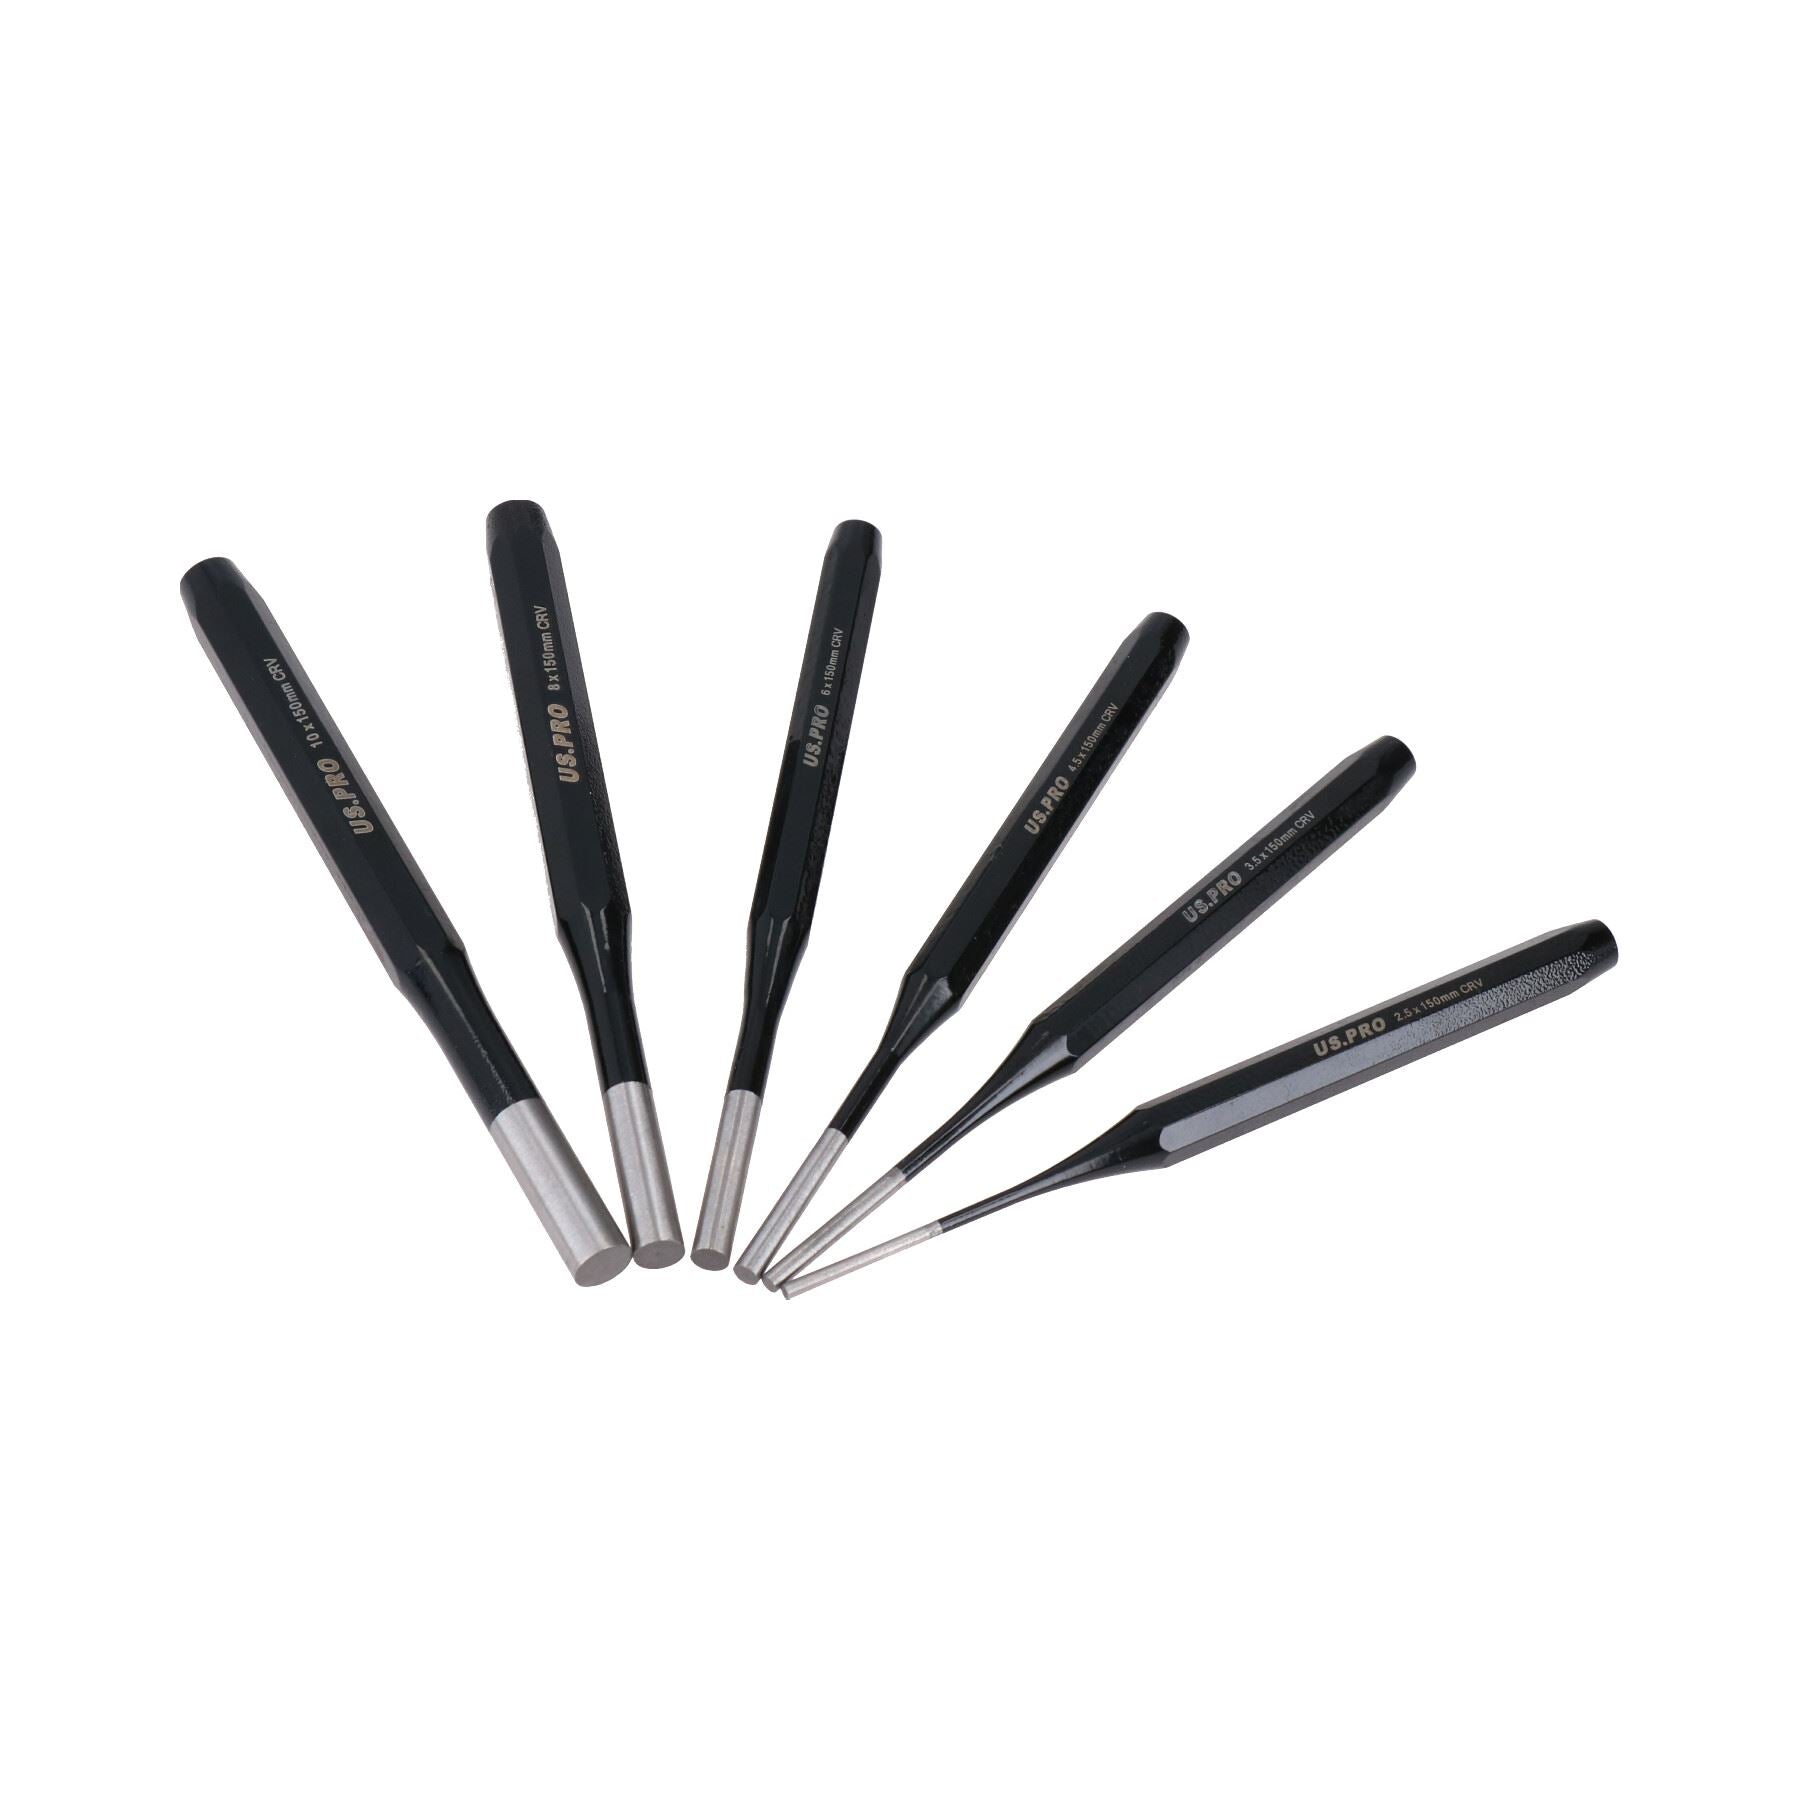 Parallel pin punch set (6 pcs) by BERGEN AT726 – AB Tools Online